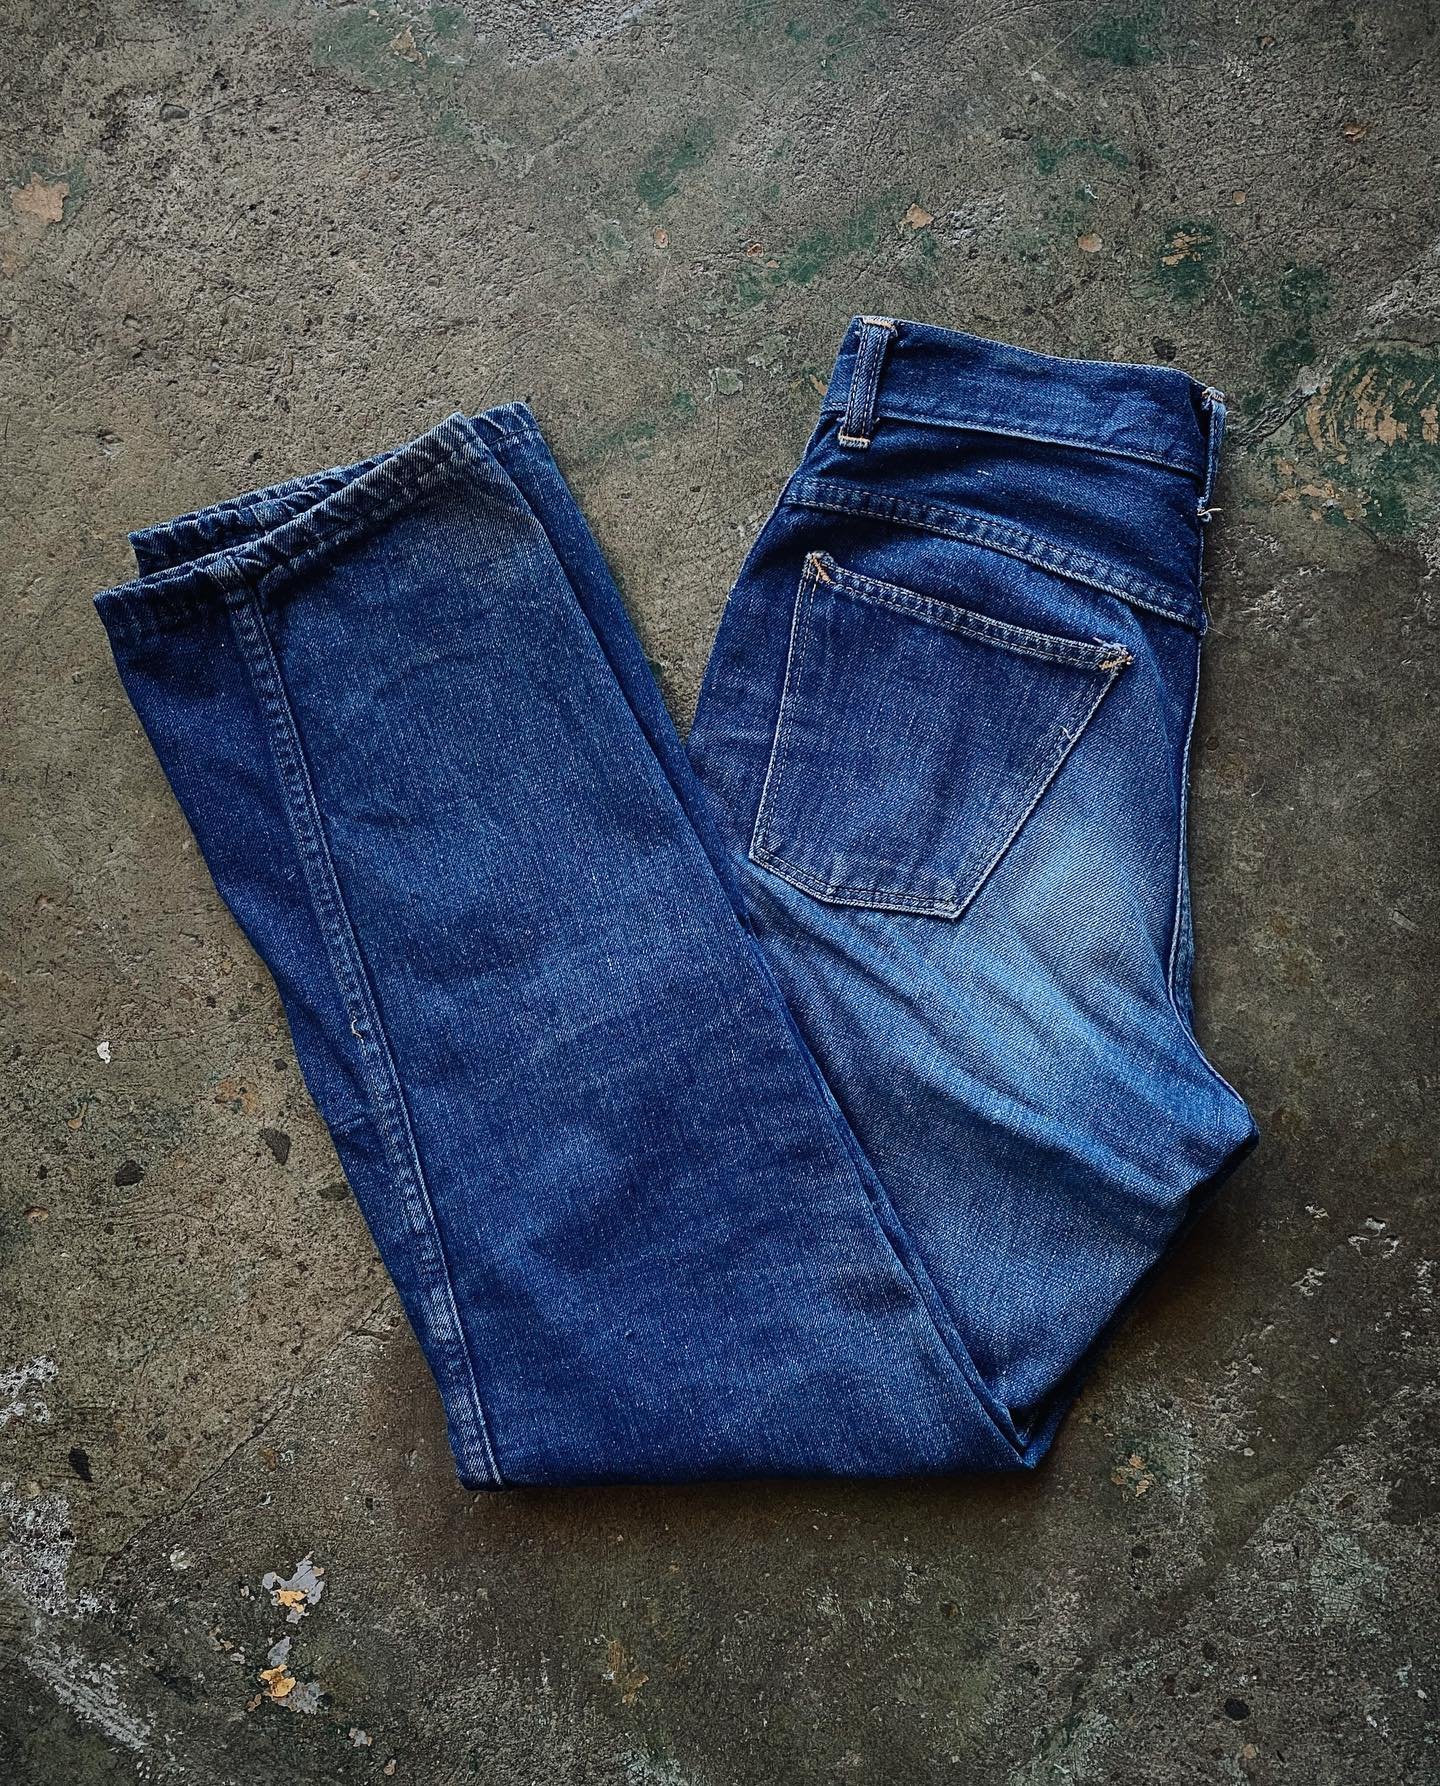 Nicely worn, unbranded &lsquo;50s/&lsquo;60s pair o&rsquo; blues. Slightly tapered fit with a 26&rdquo; waist